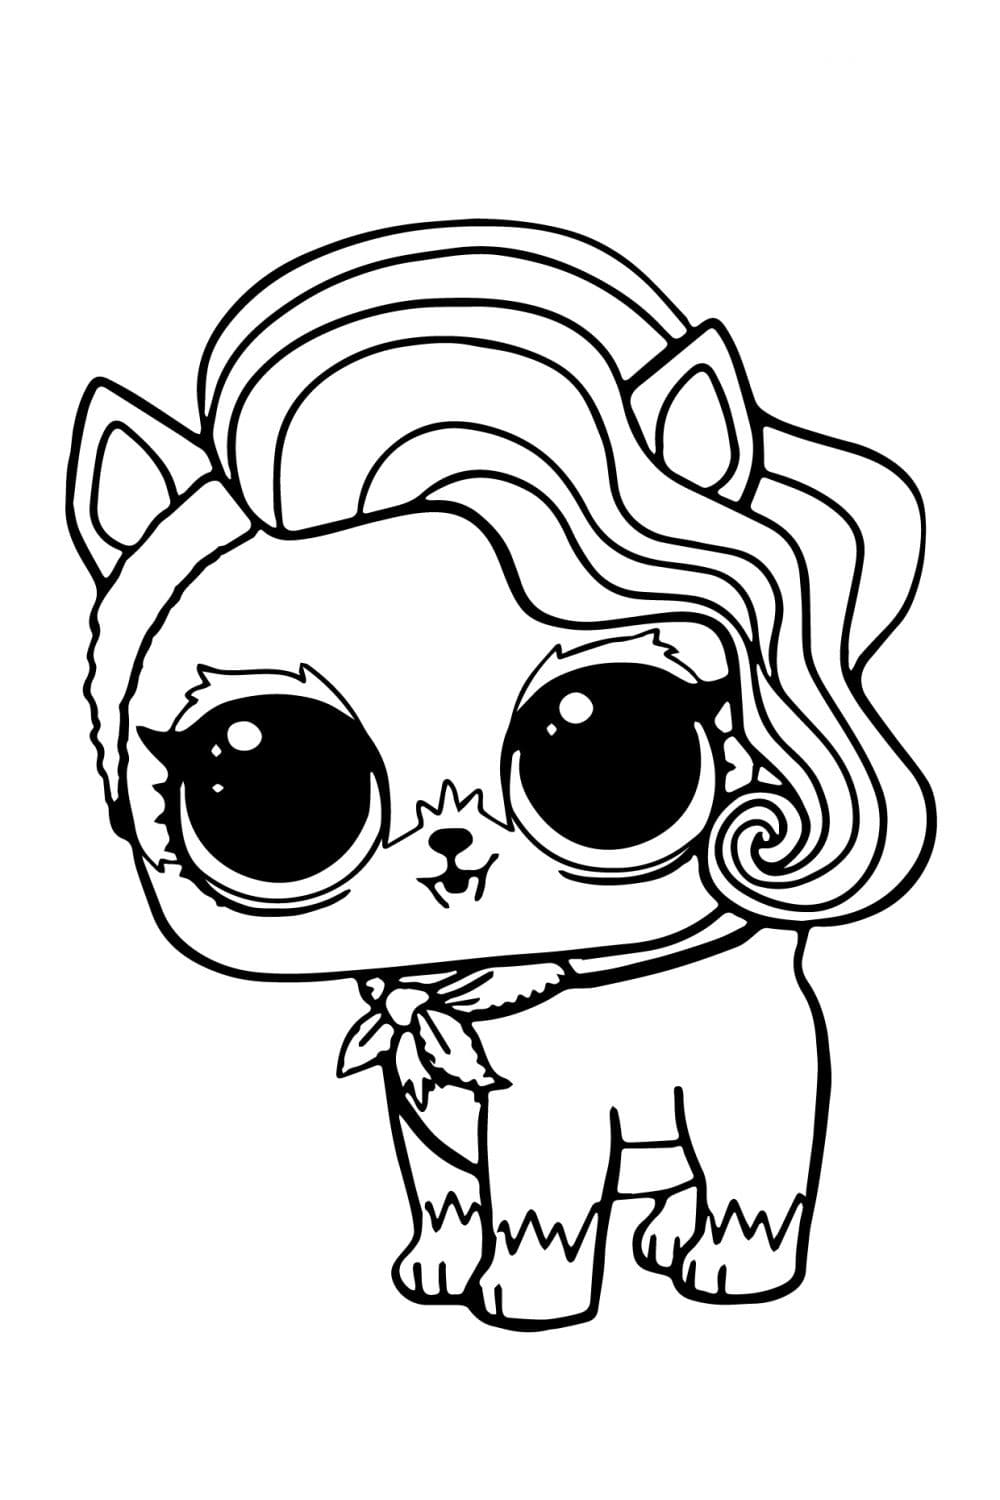 38+ awesome pictures Lol Cat Coloring Pages - L O L Surprise Dolls